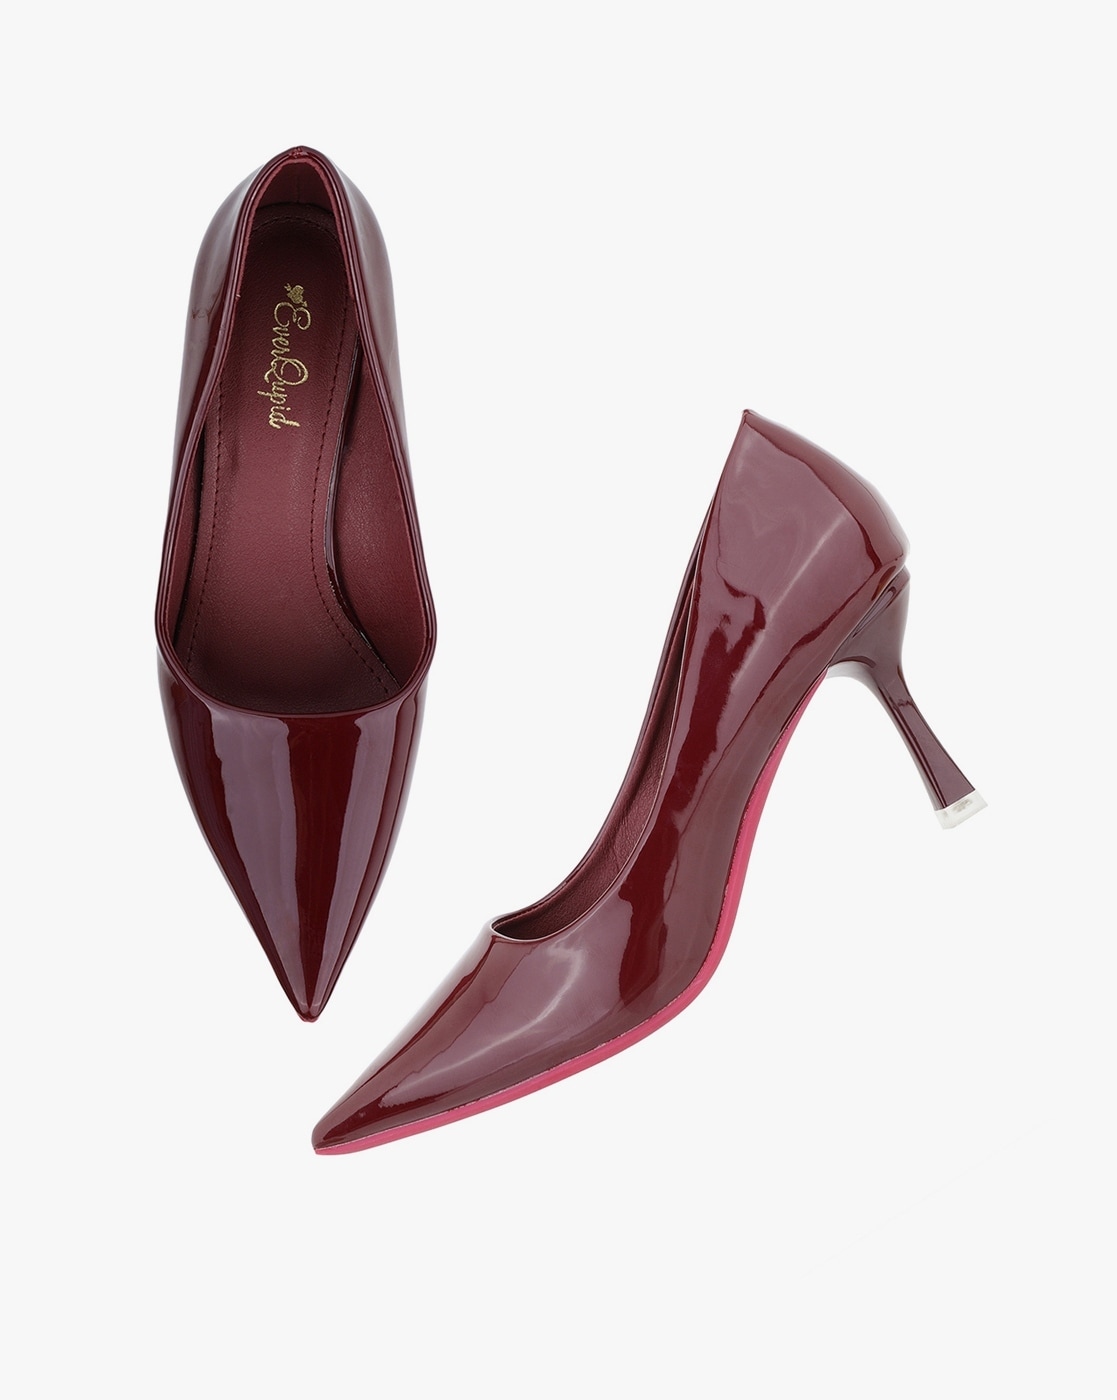 Gianvito Rossi Gianvito 105 Royale Burgundy Suede Pumps - Kate Middleton  Shoes - Kate's Closet